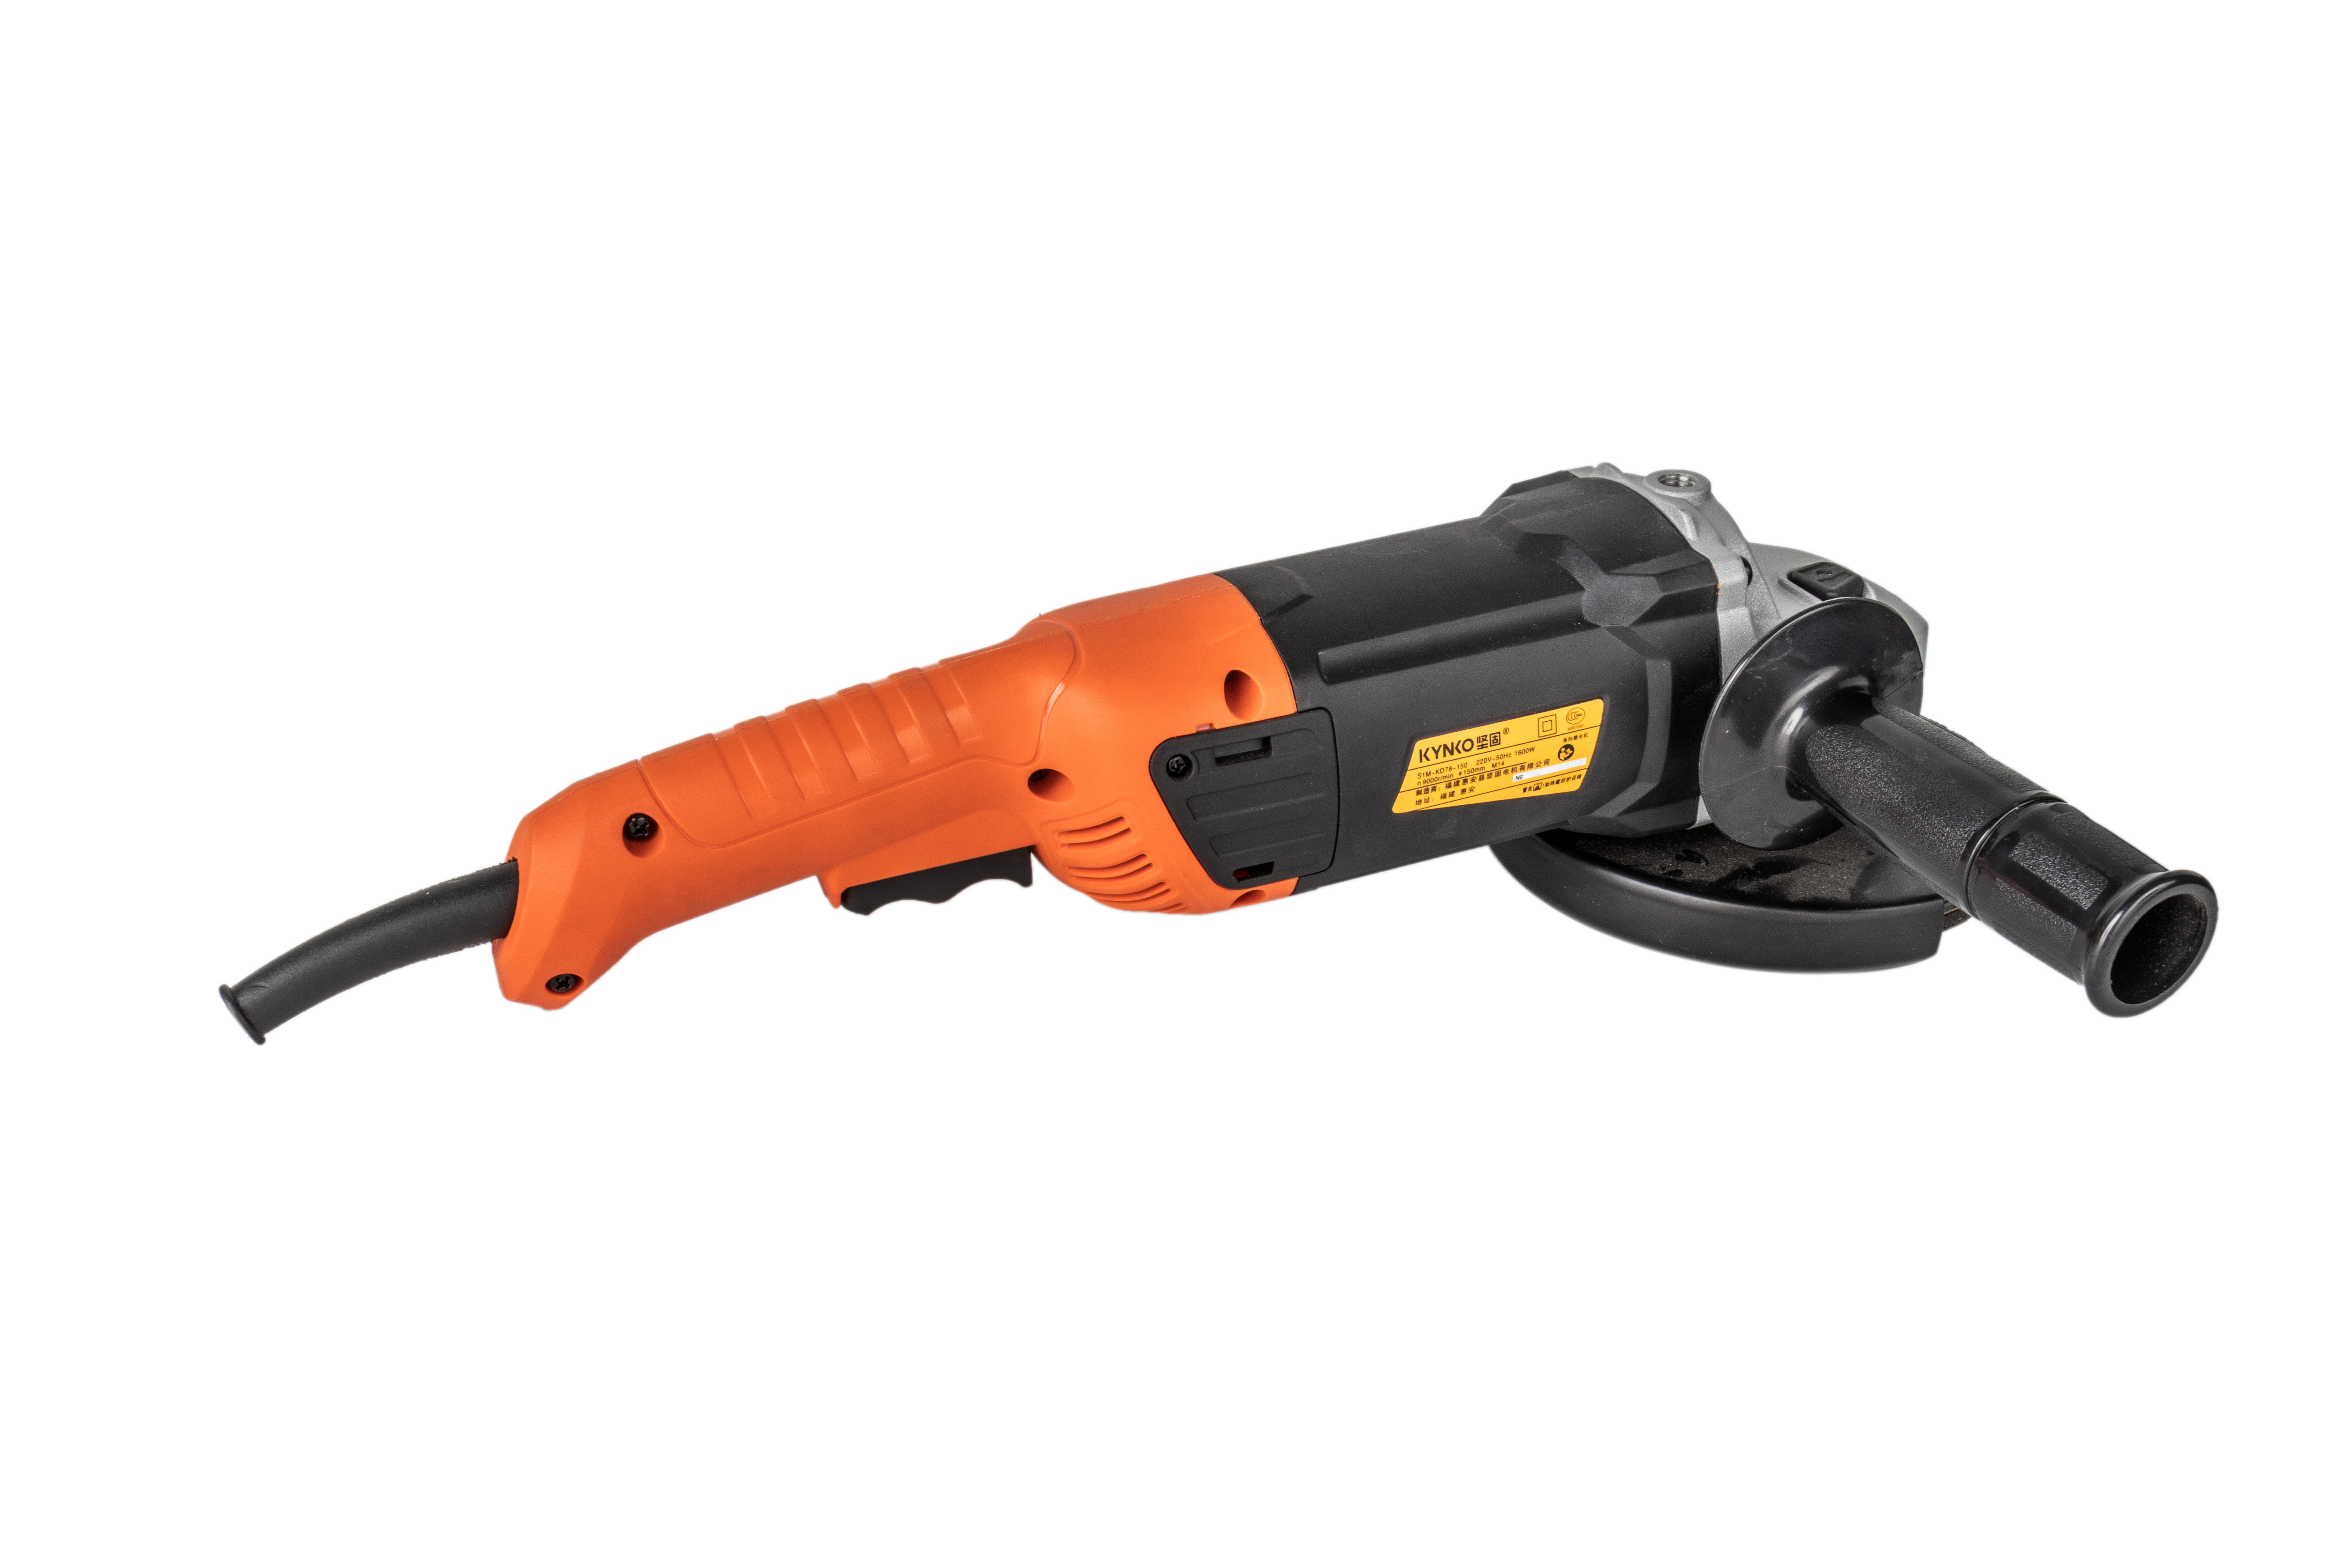 5''/6'' 1600W powerful professional large angle grinder